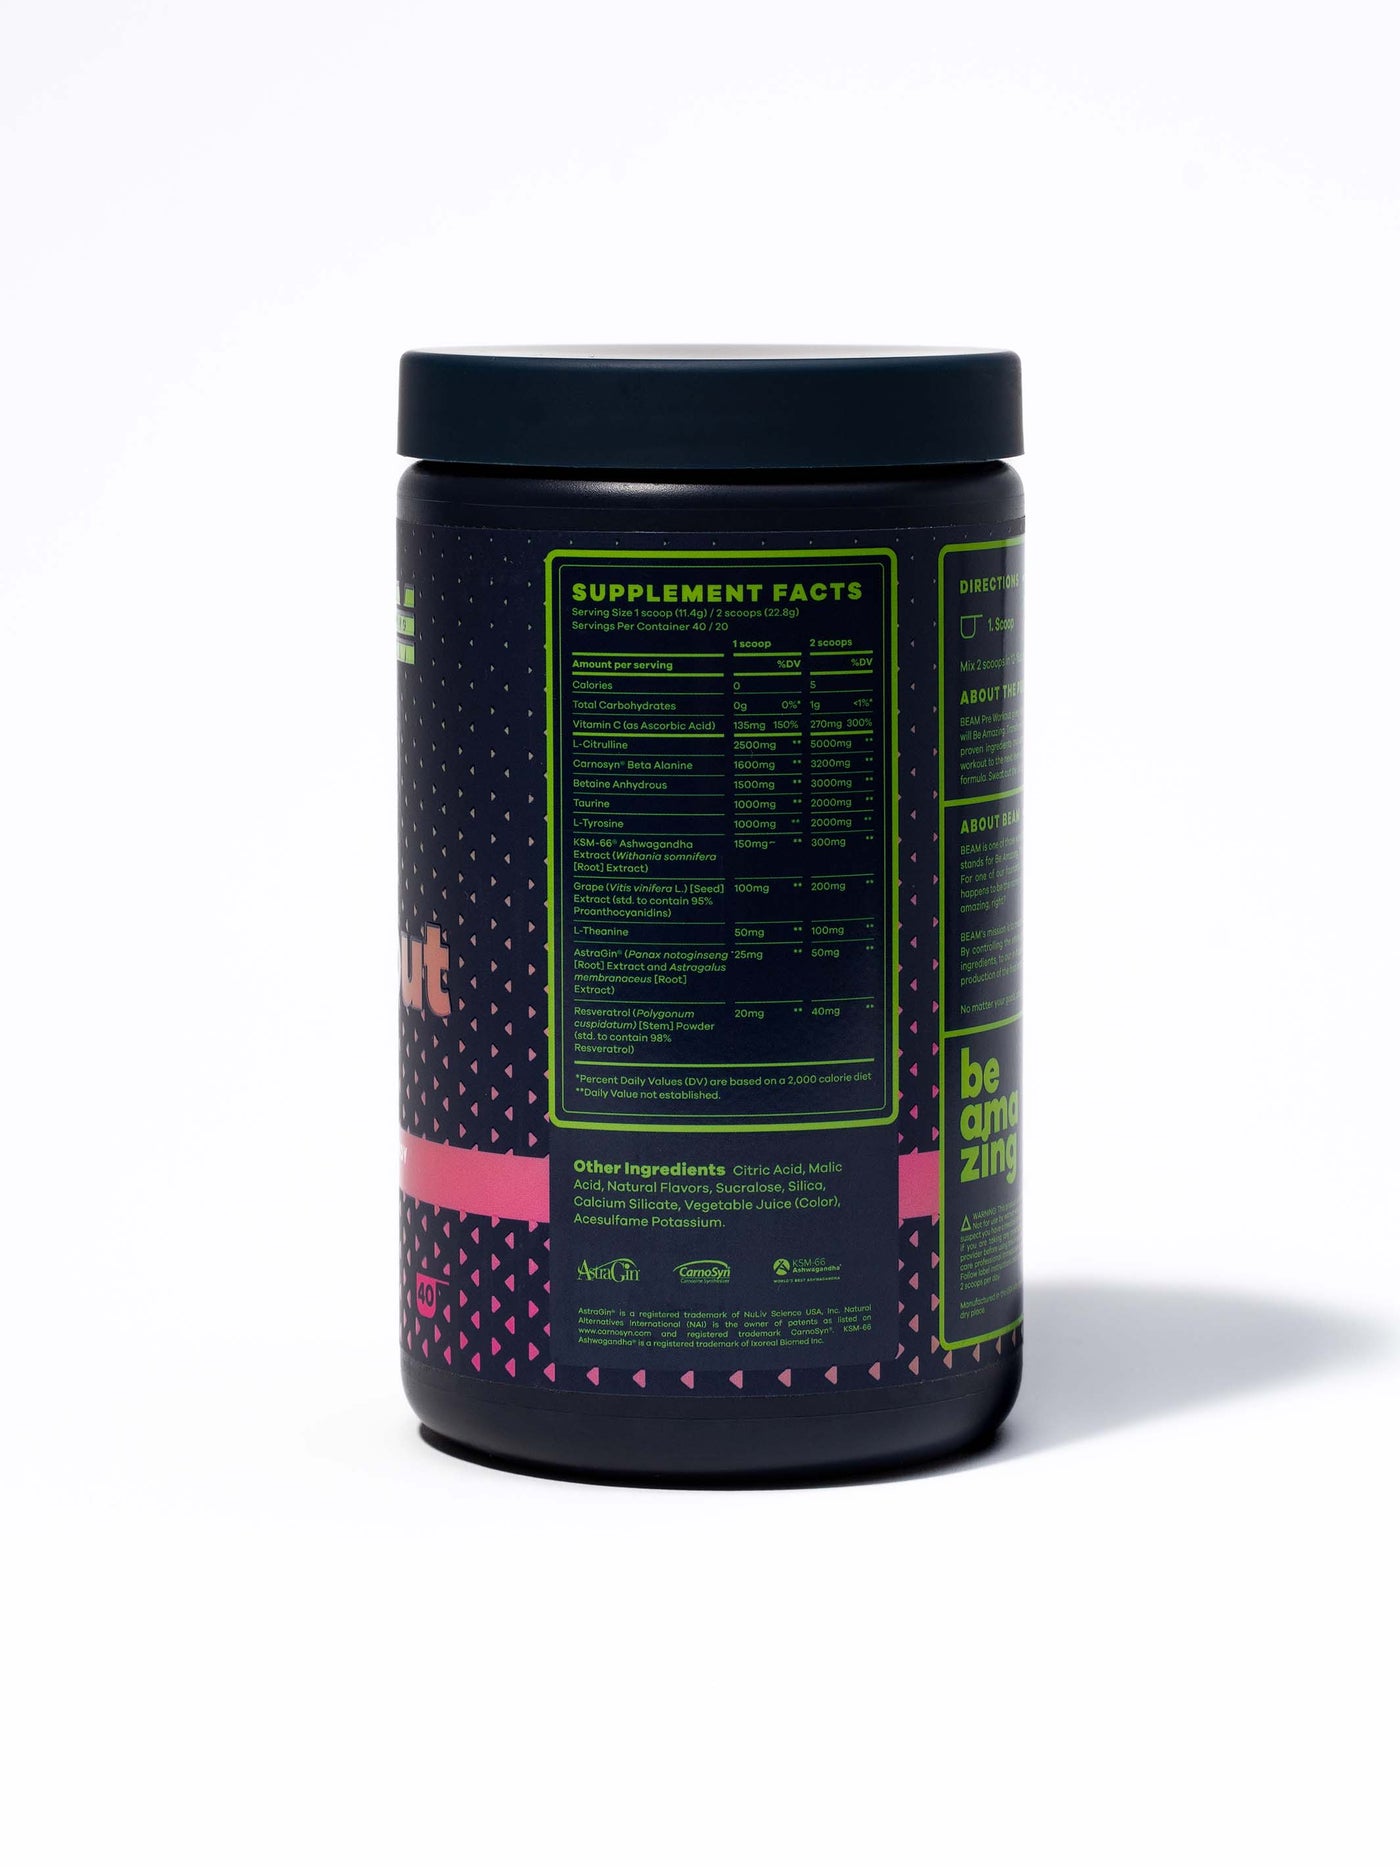 Watermelon Candy Pre Workout Side 2#40 Scoops / Watermelon Candy